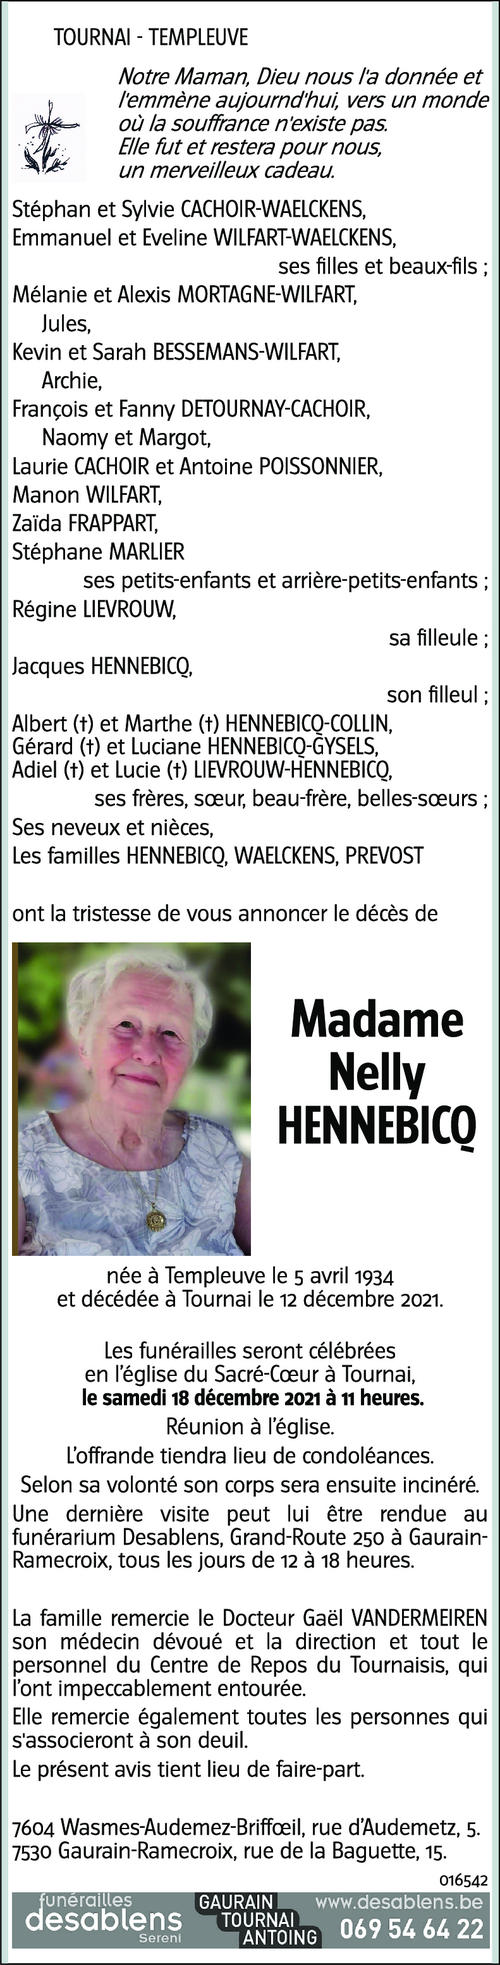 Nelly HENNEBICQ